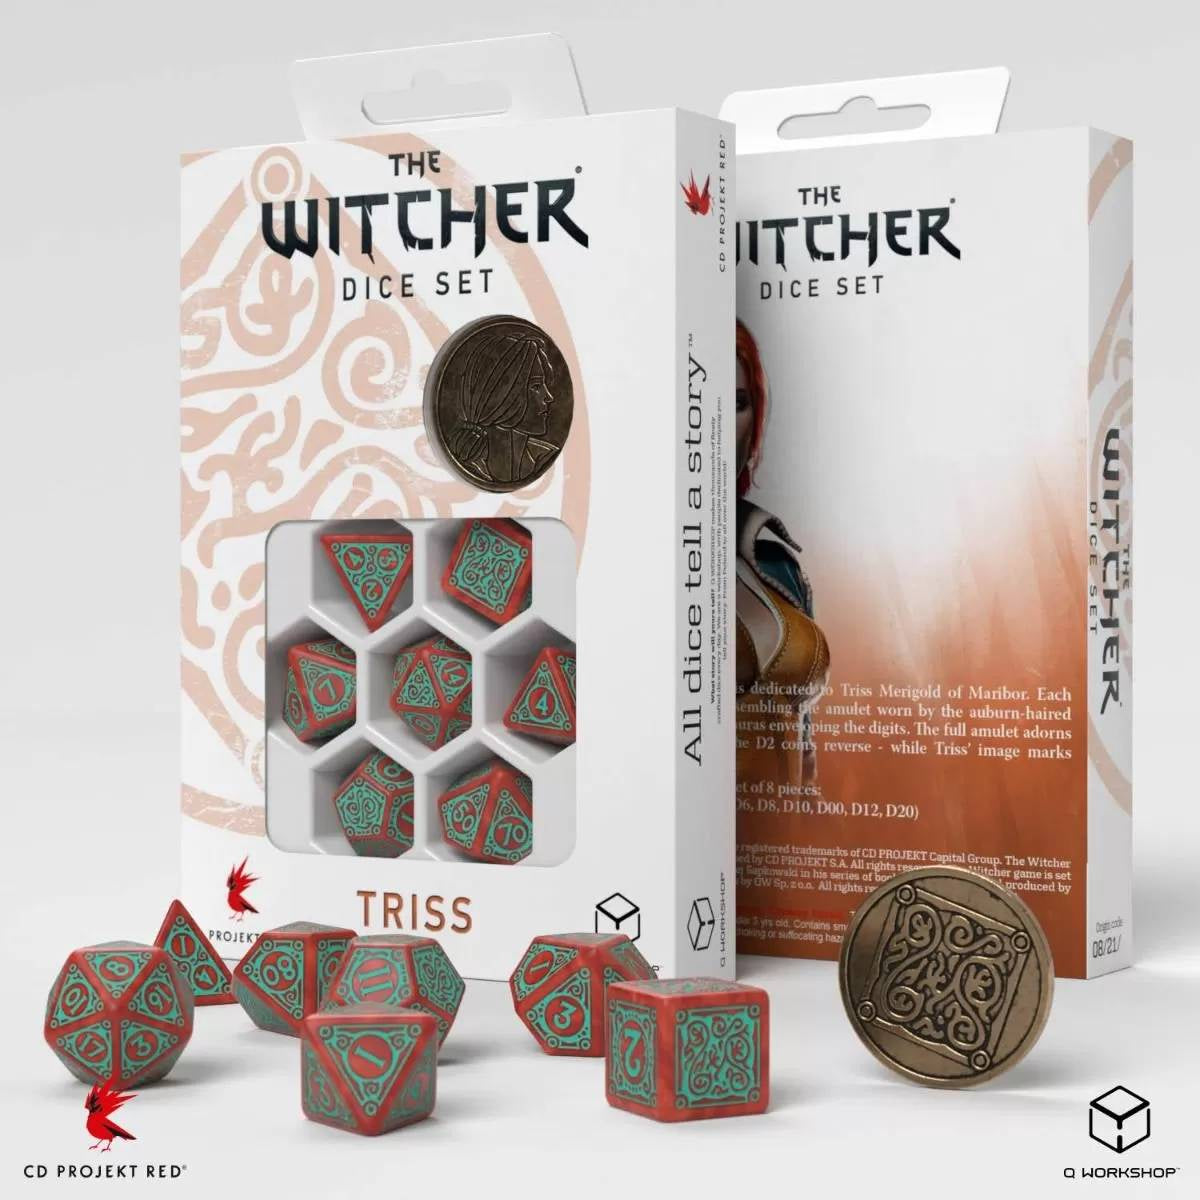 Q Workshop - The Witcher Dice Set Triss - Merigold the Fearless